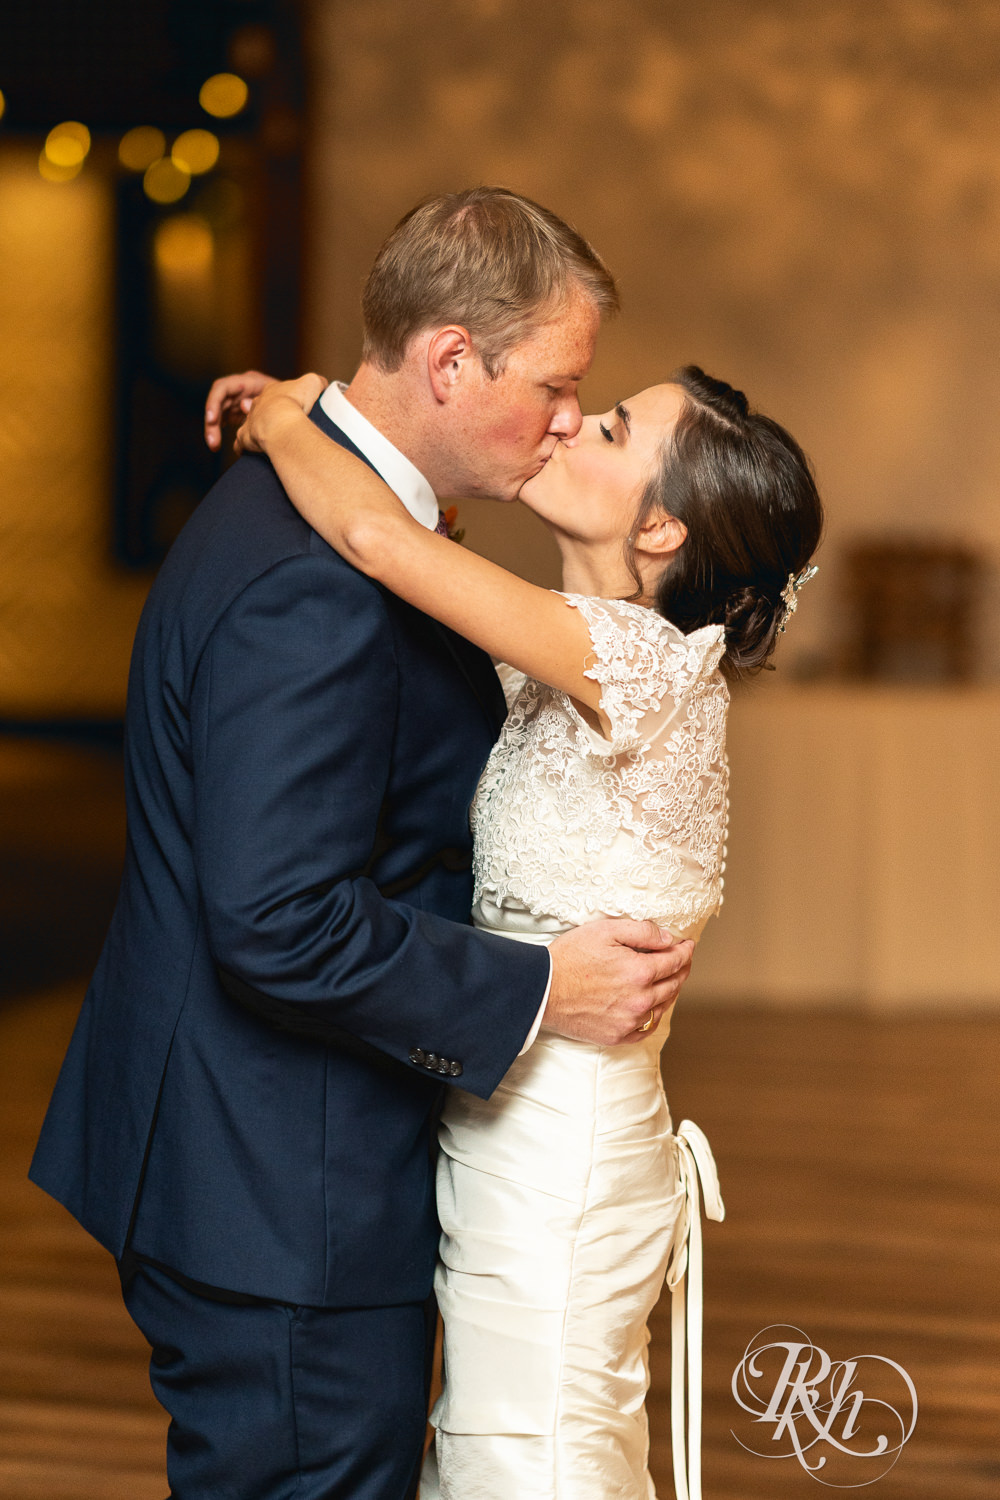 Bride and groom share first look at The Grand 1858 in Minneapolis, Minnesota.